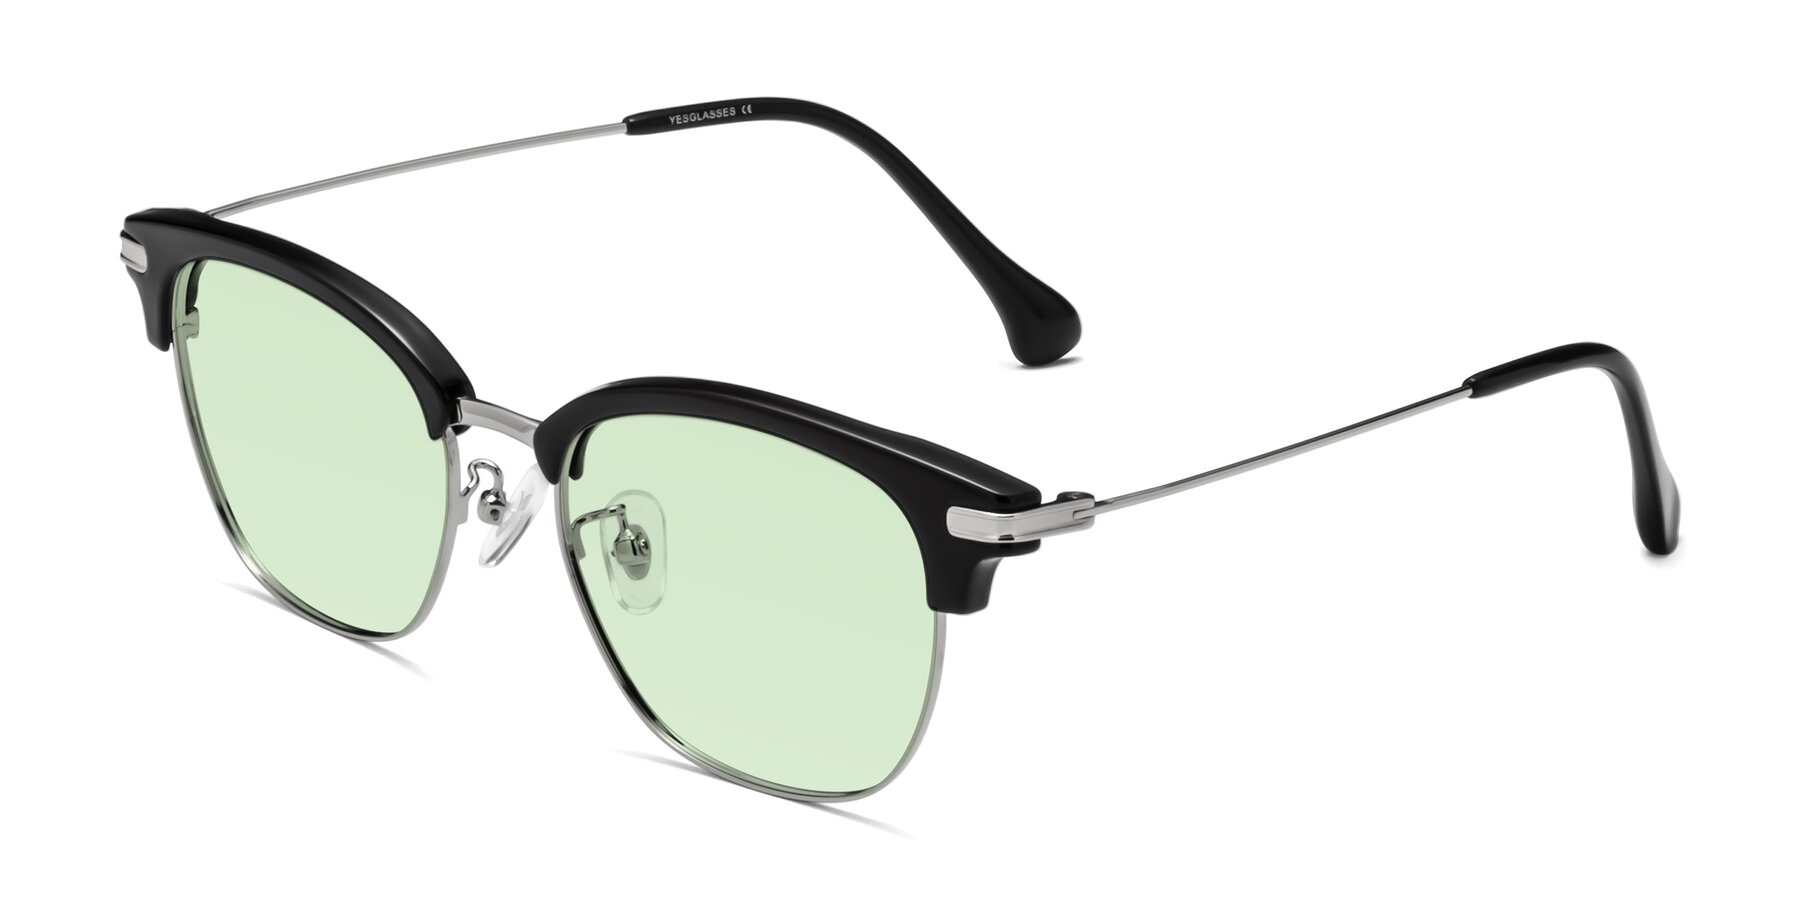 Angle of Obrien in Black-Sliver with Light Green Tinted Lenses